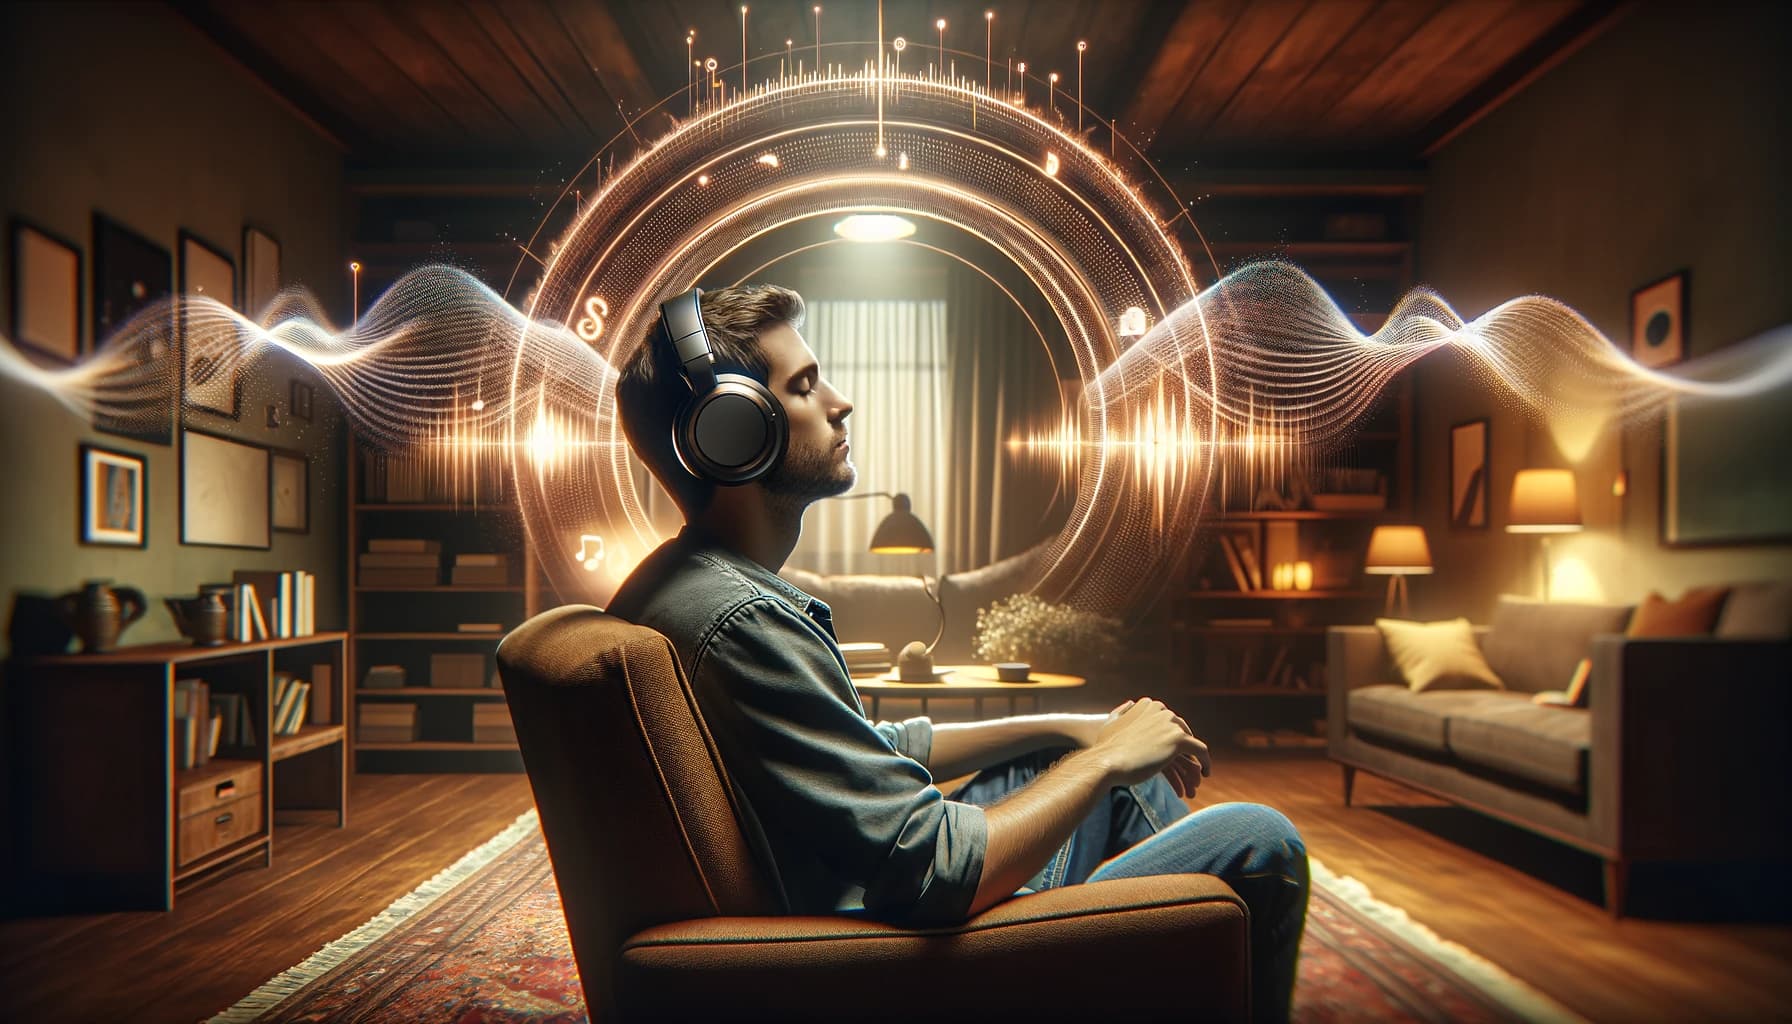 A wide image showing a person experiencing immersive audio through high-end headphones in a relaxed home setting.